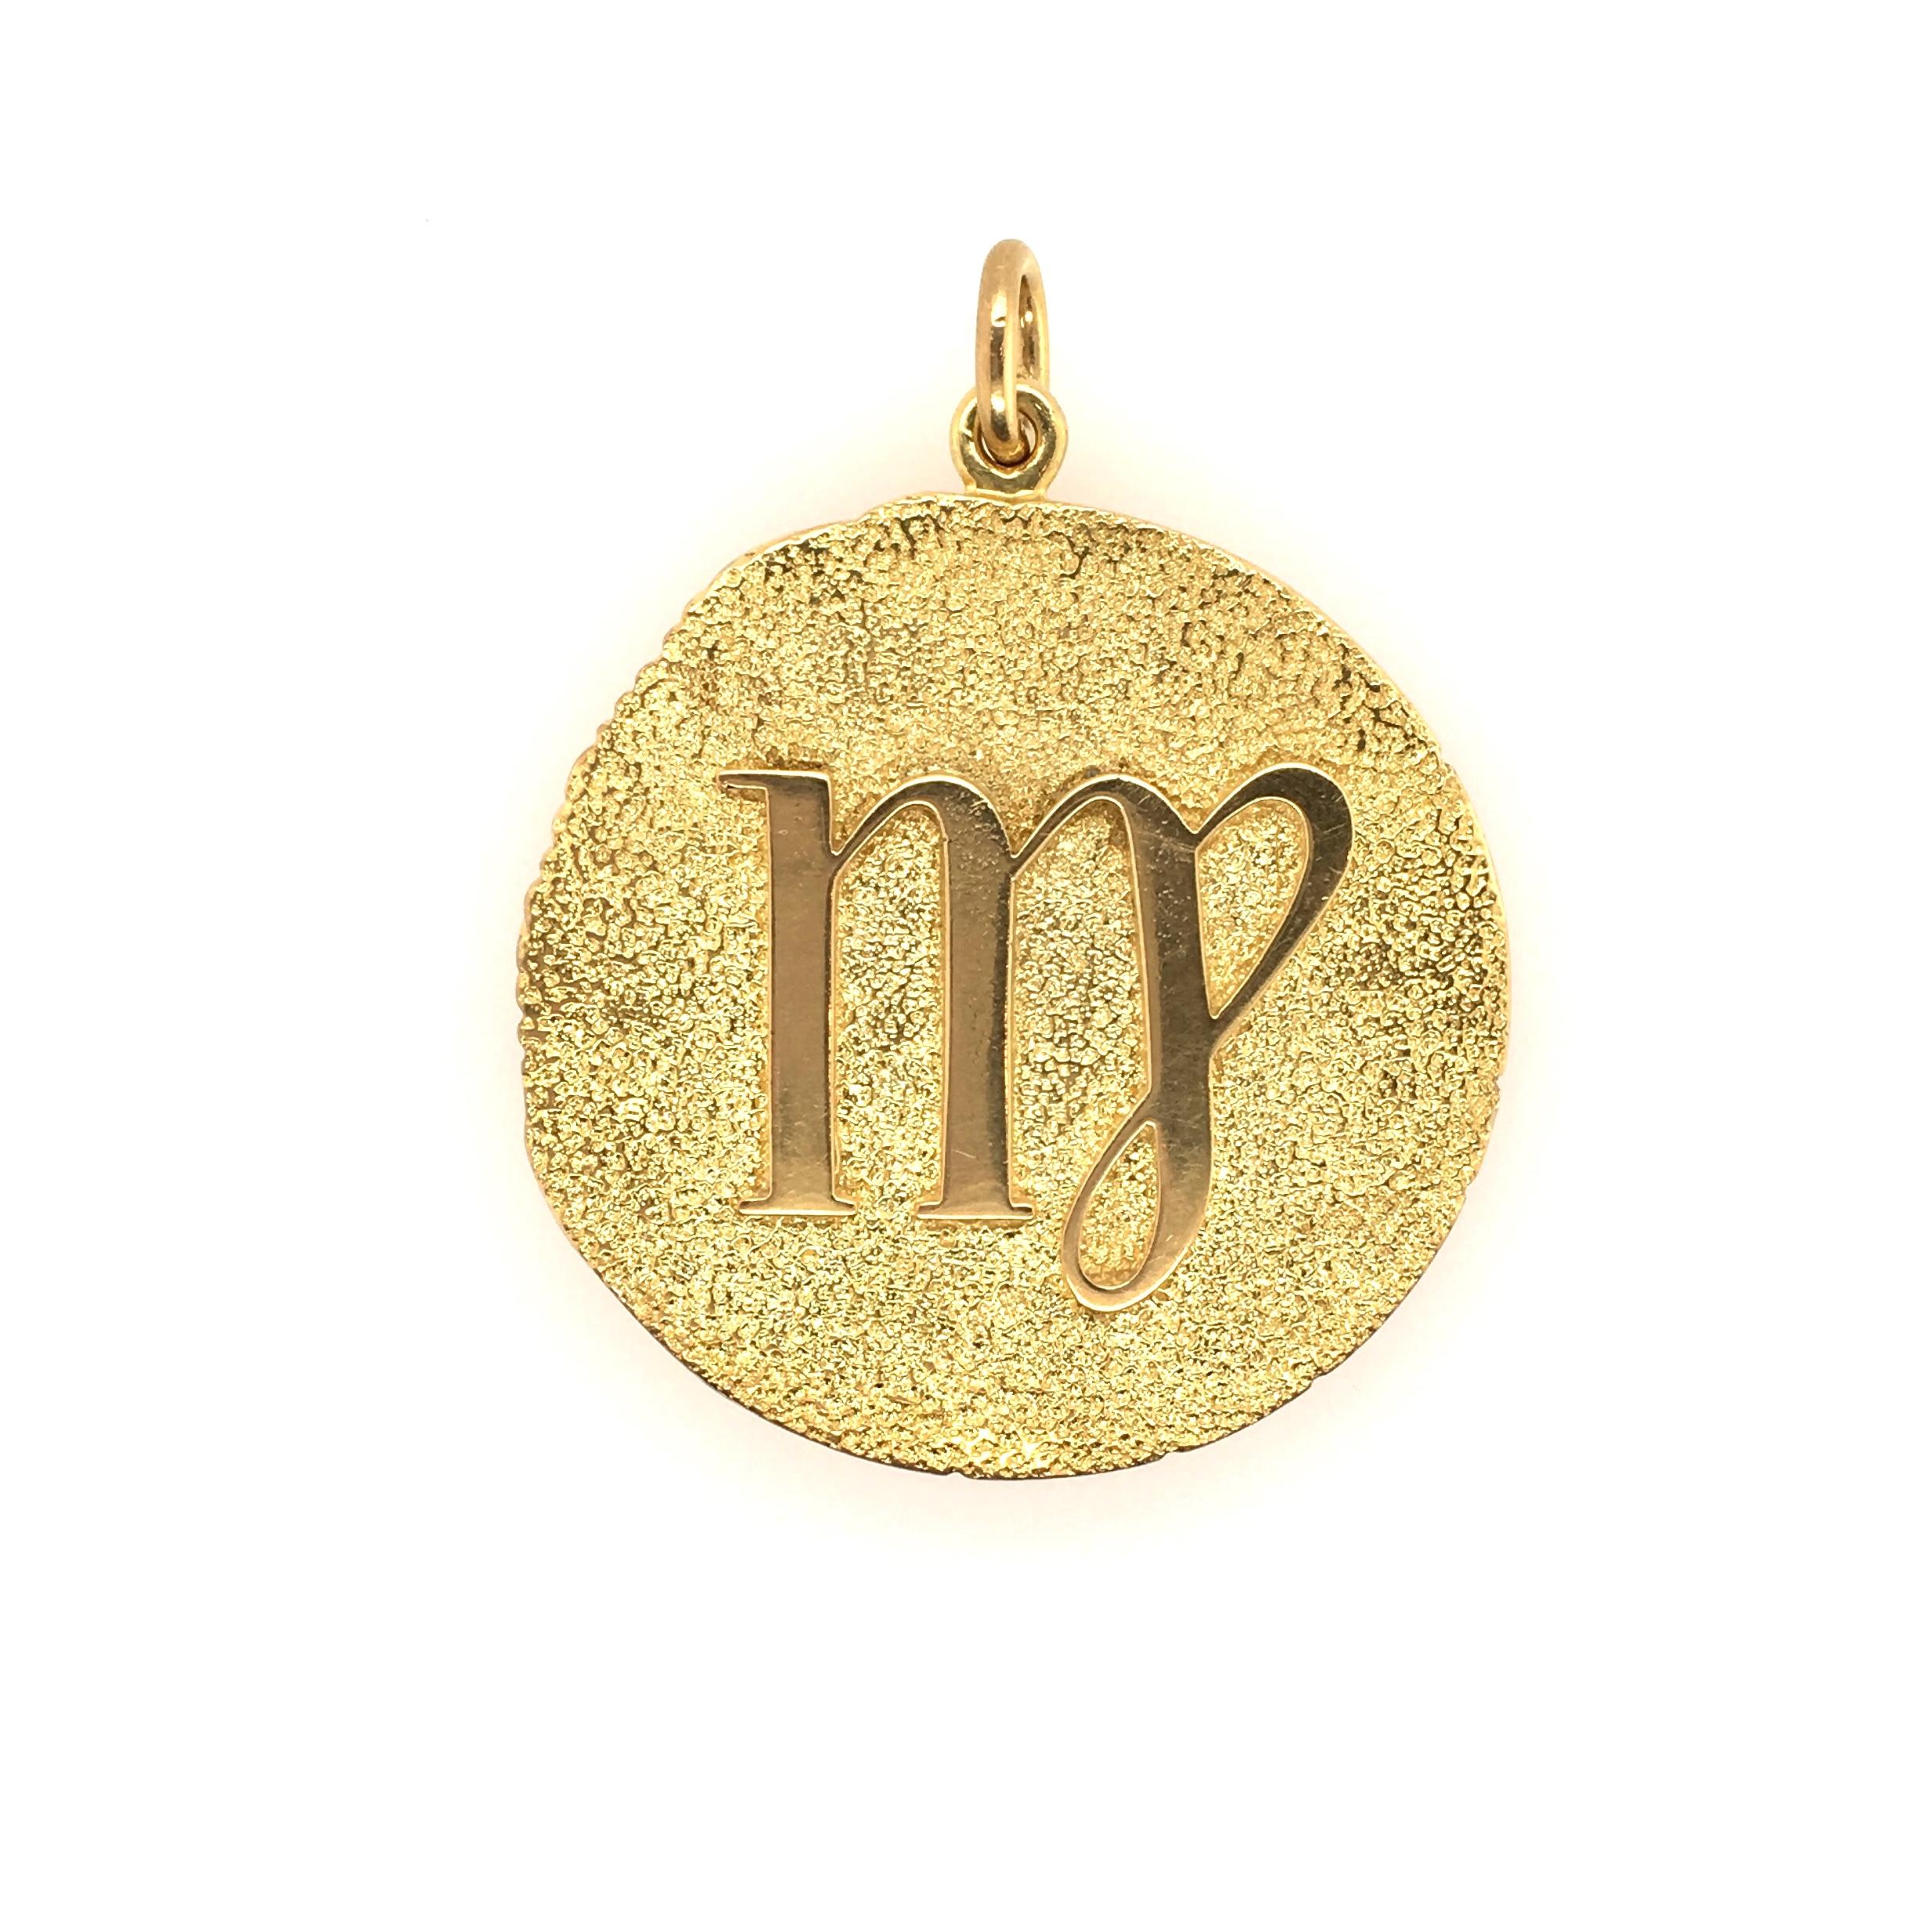 An 18 karat yellow gold and diamond “Virgo” pendant.  Signed Tiffany, Italy.  The pendant is set with (3) three circular shape diamonds next to a man’s profile on one side, and the symbol for Virgo on the other side.  Gross weight approximately 48.8